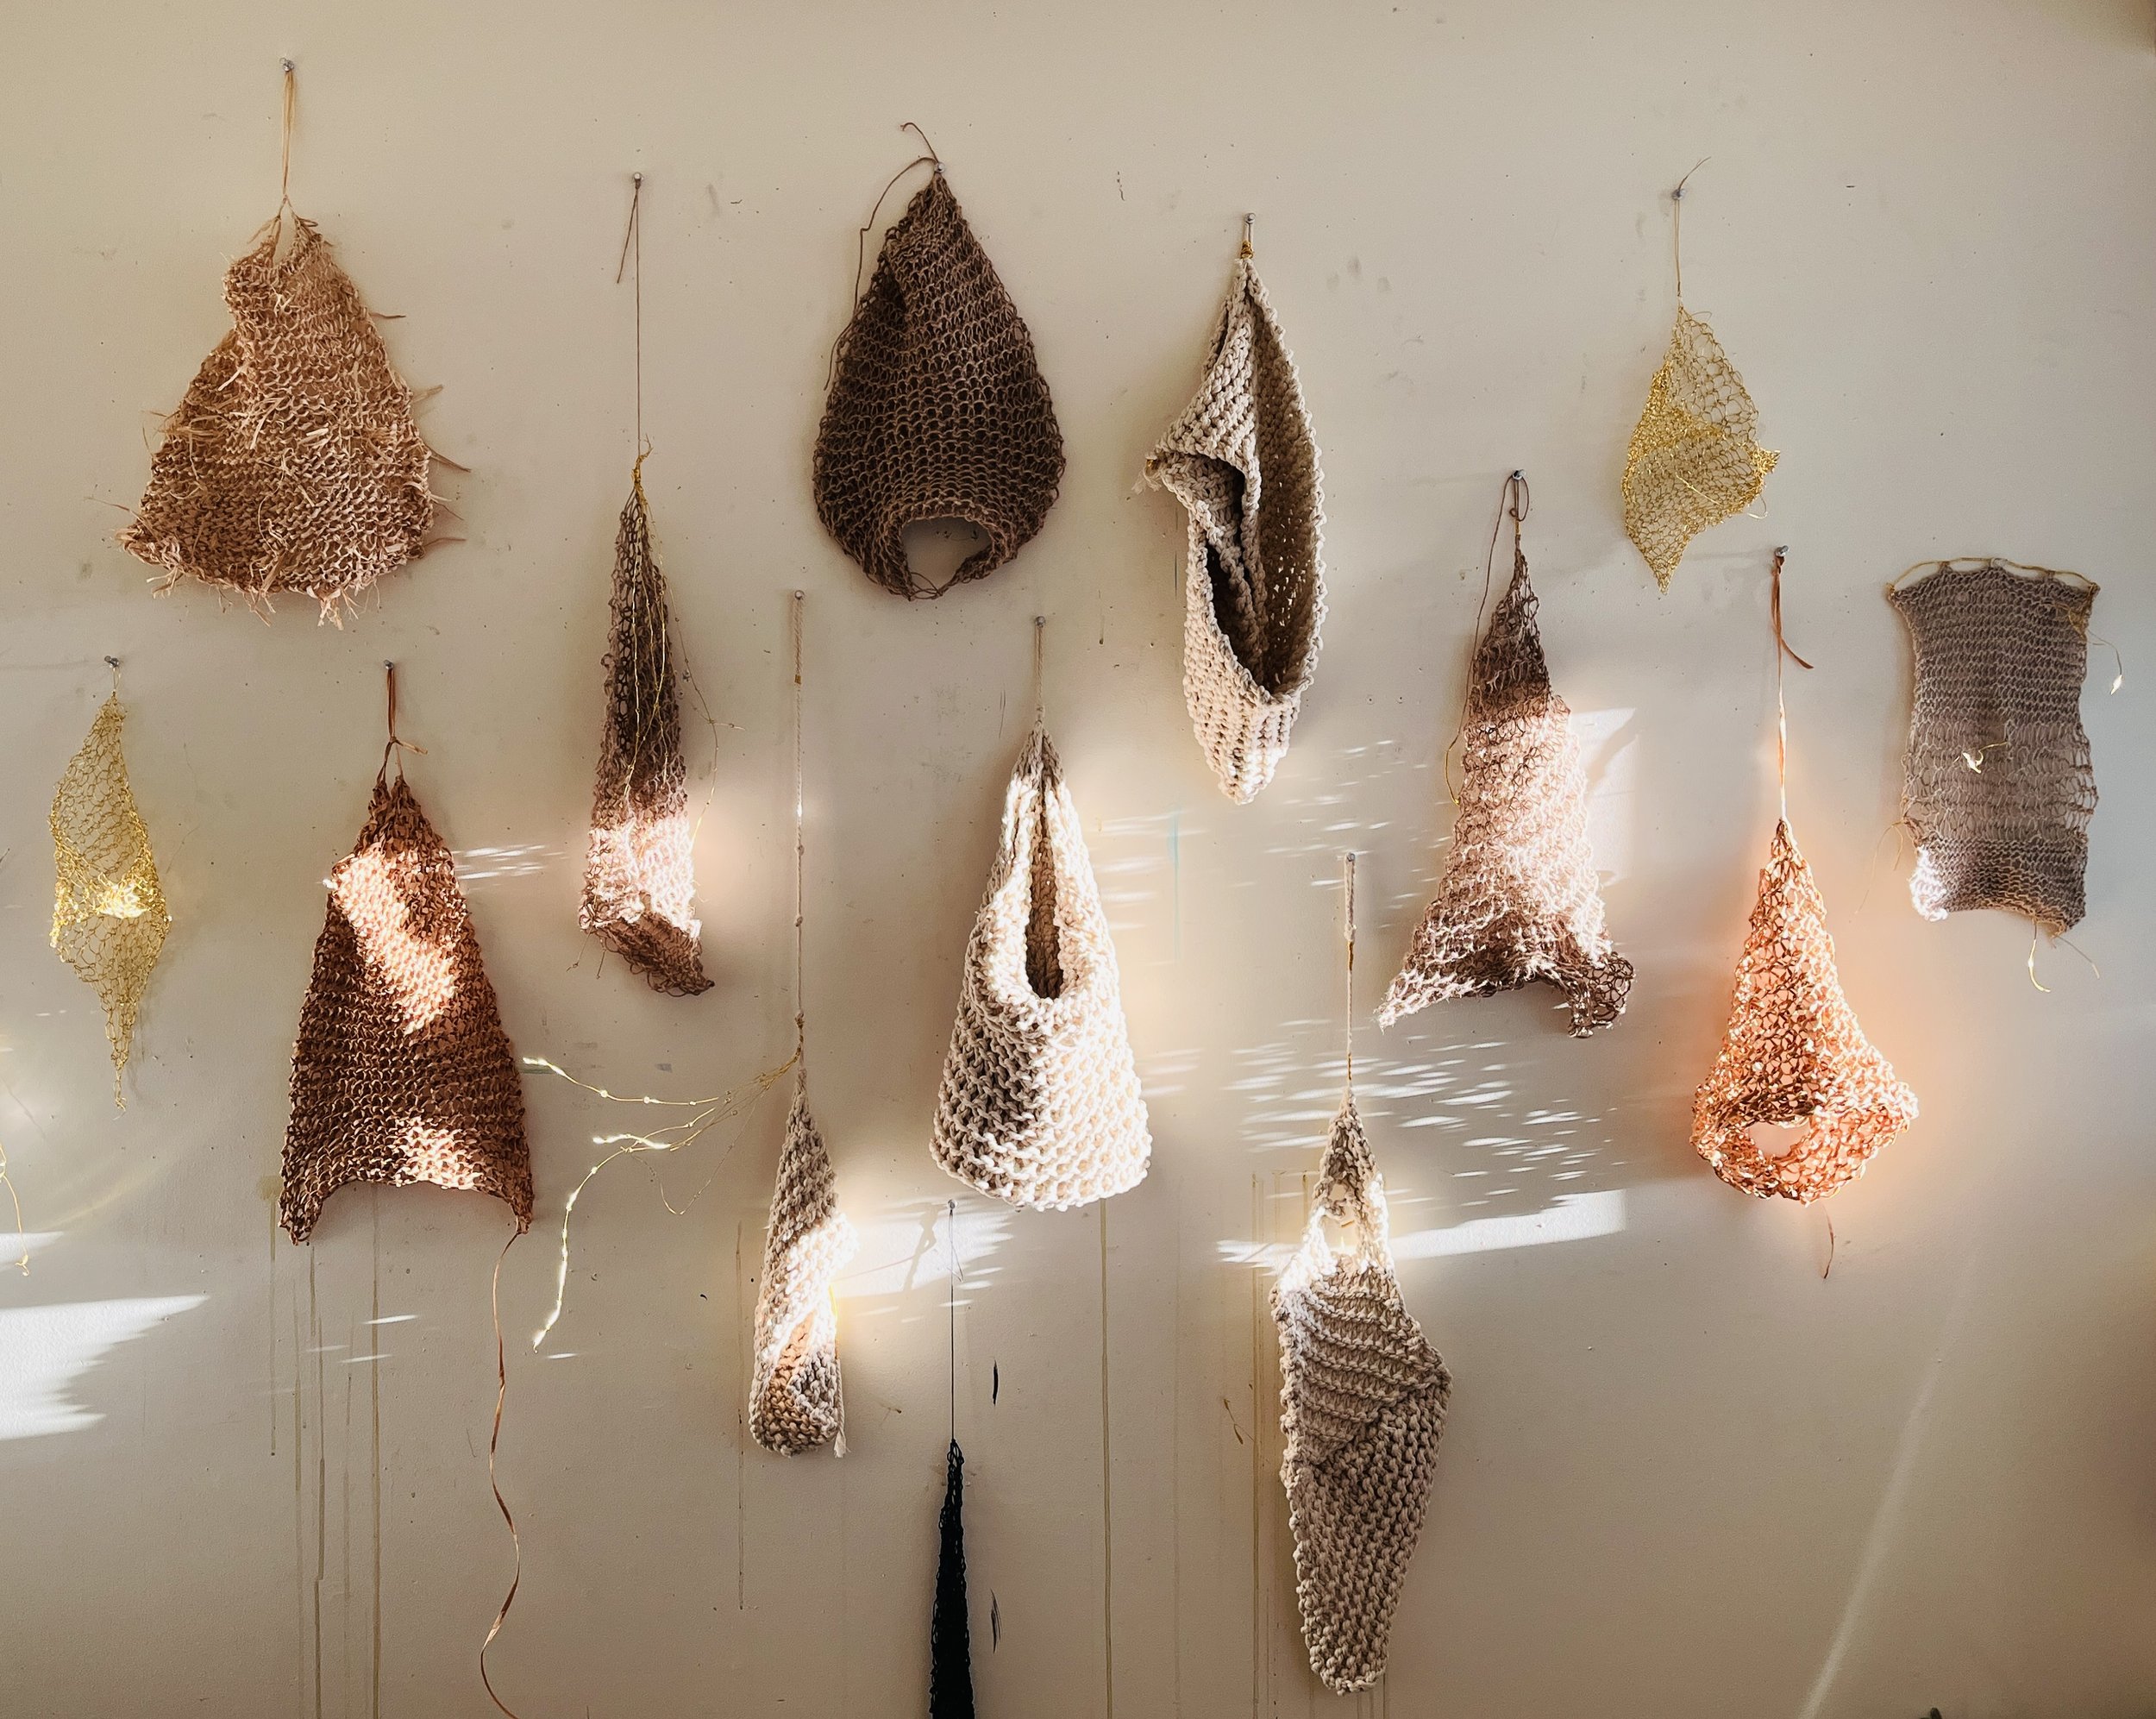   Forces collection of pieces from series   knitted and crocheted wire, wool, and other natural fibers 